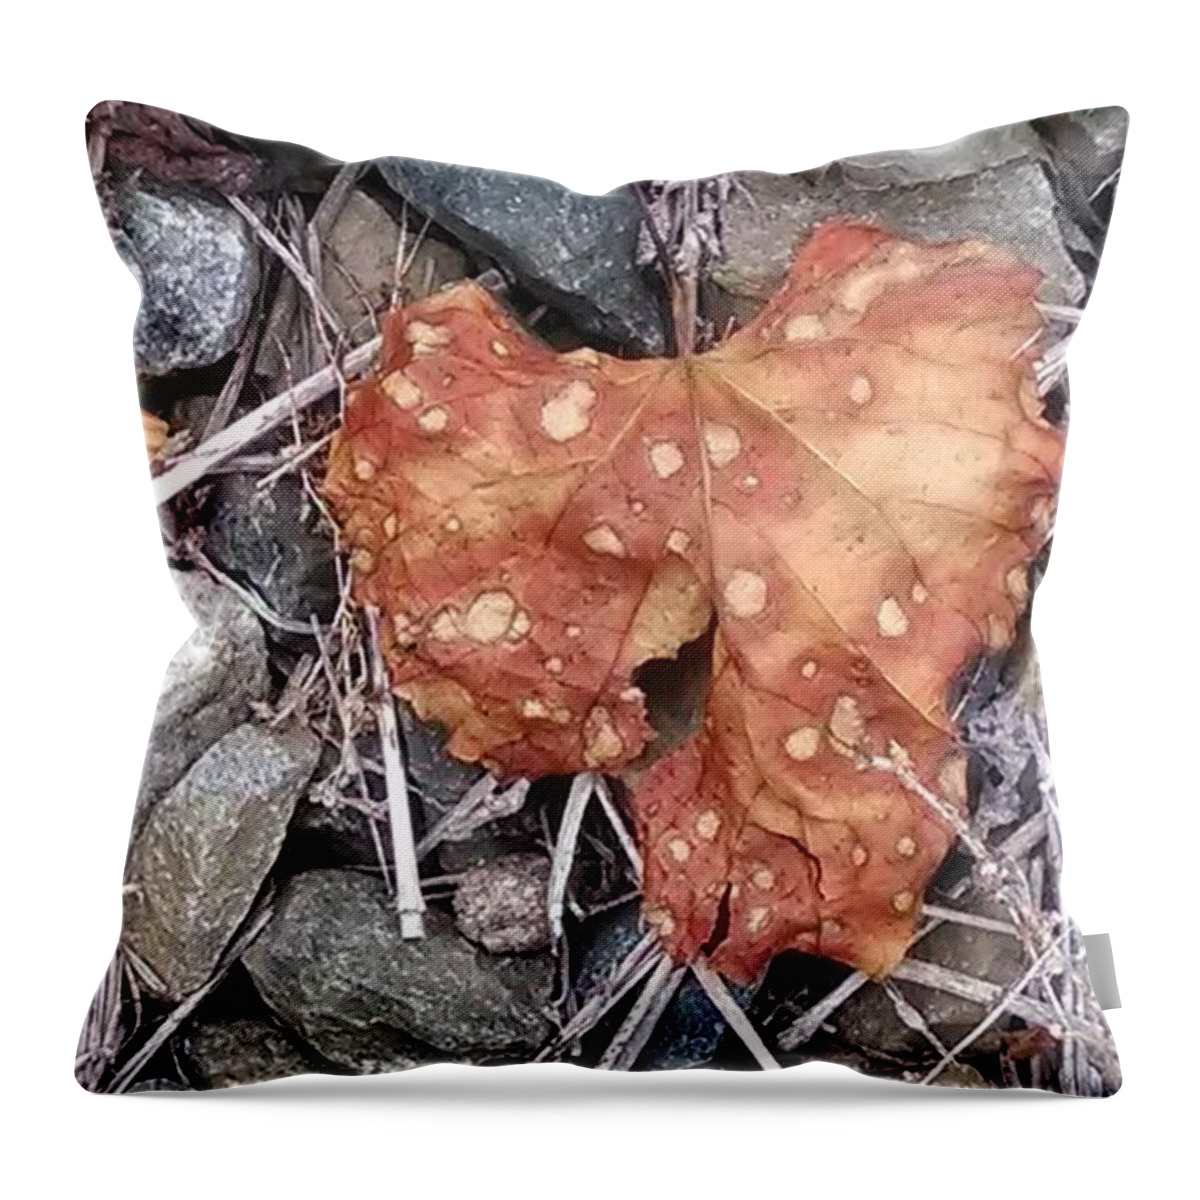 Leaf Throw Pillow featuring the photograph Speckled Leaf by Tammy Finnegan